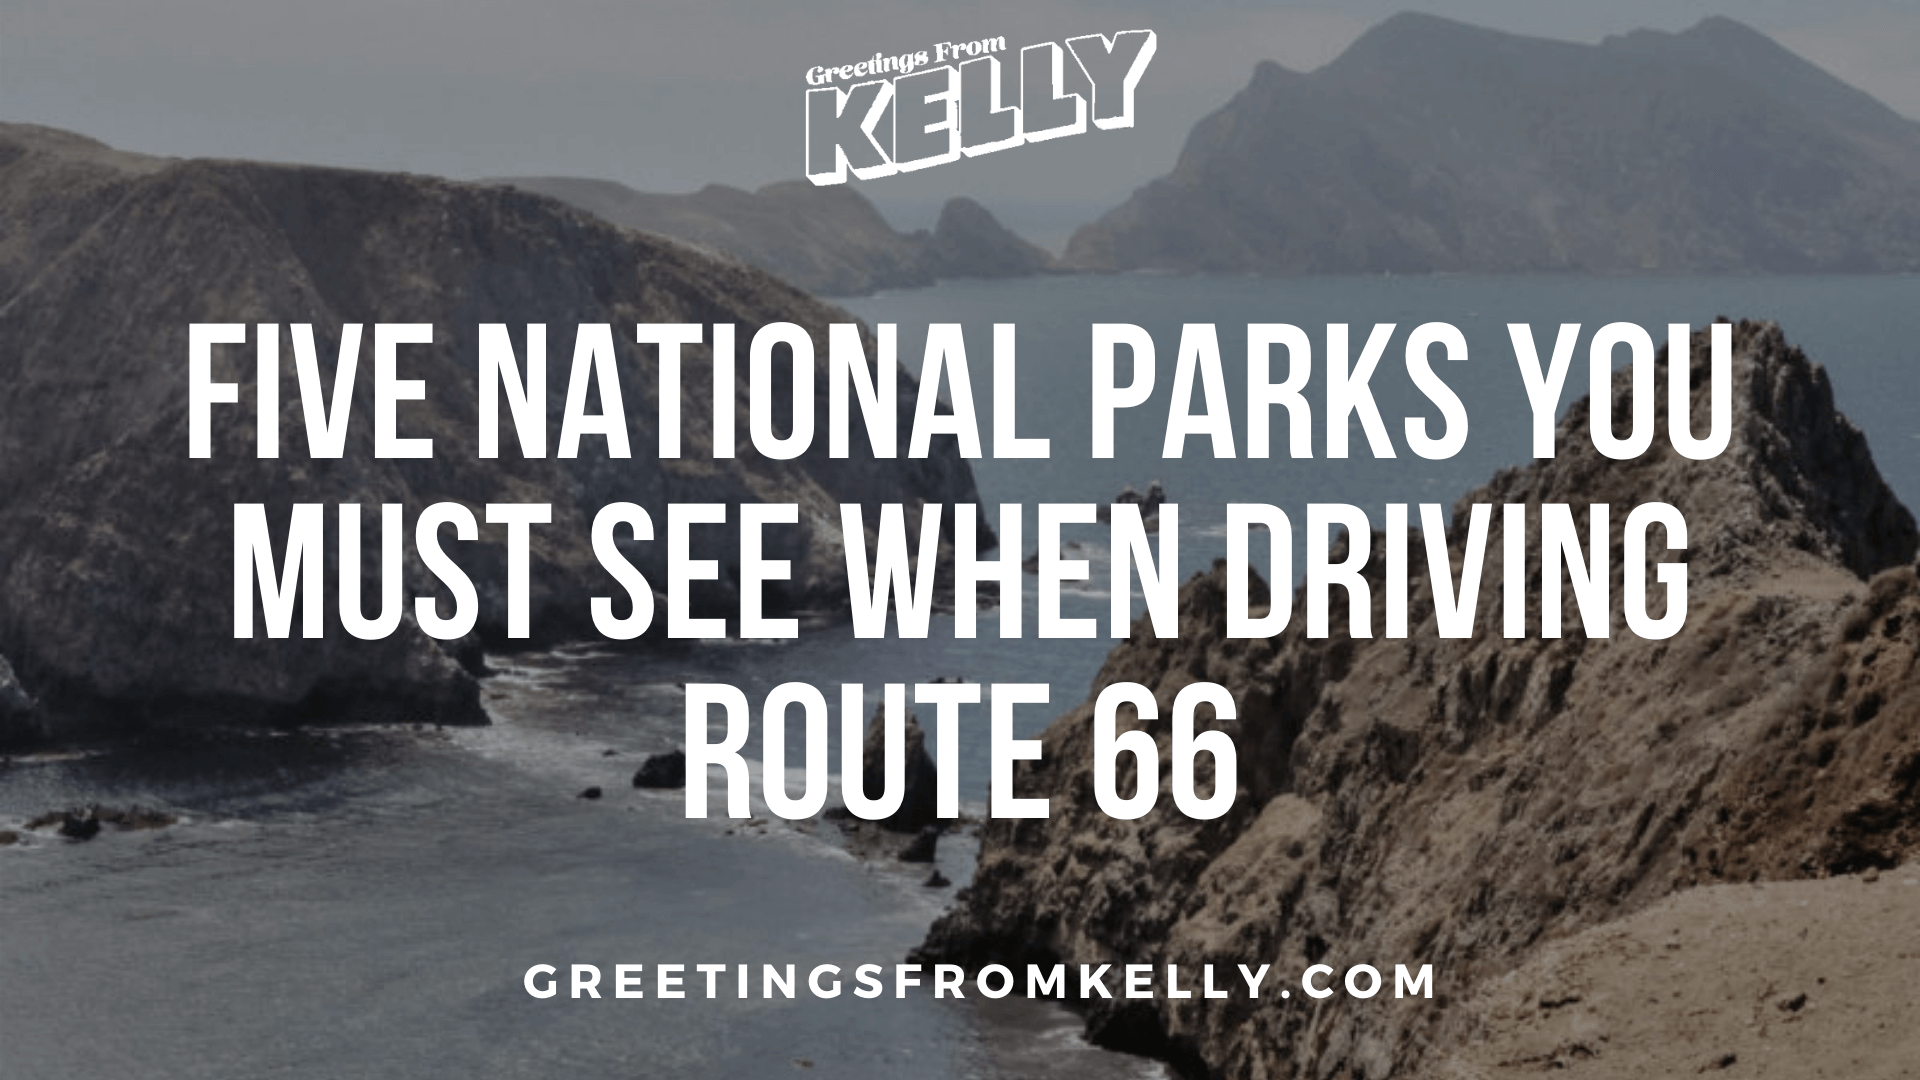 Five National Parks You Must See When Driving Route 66